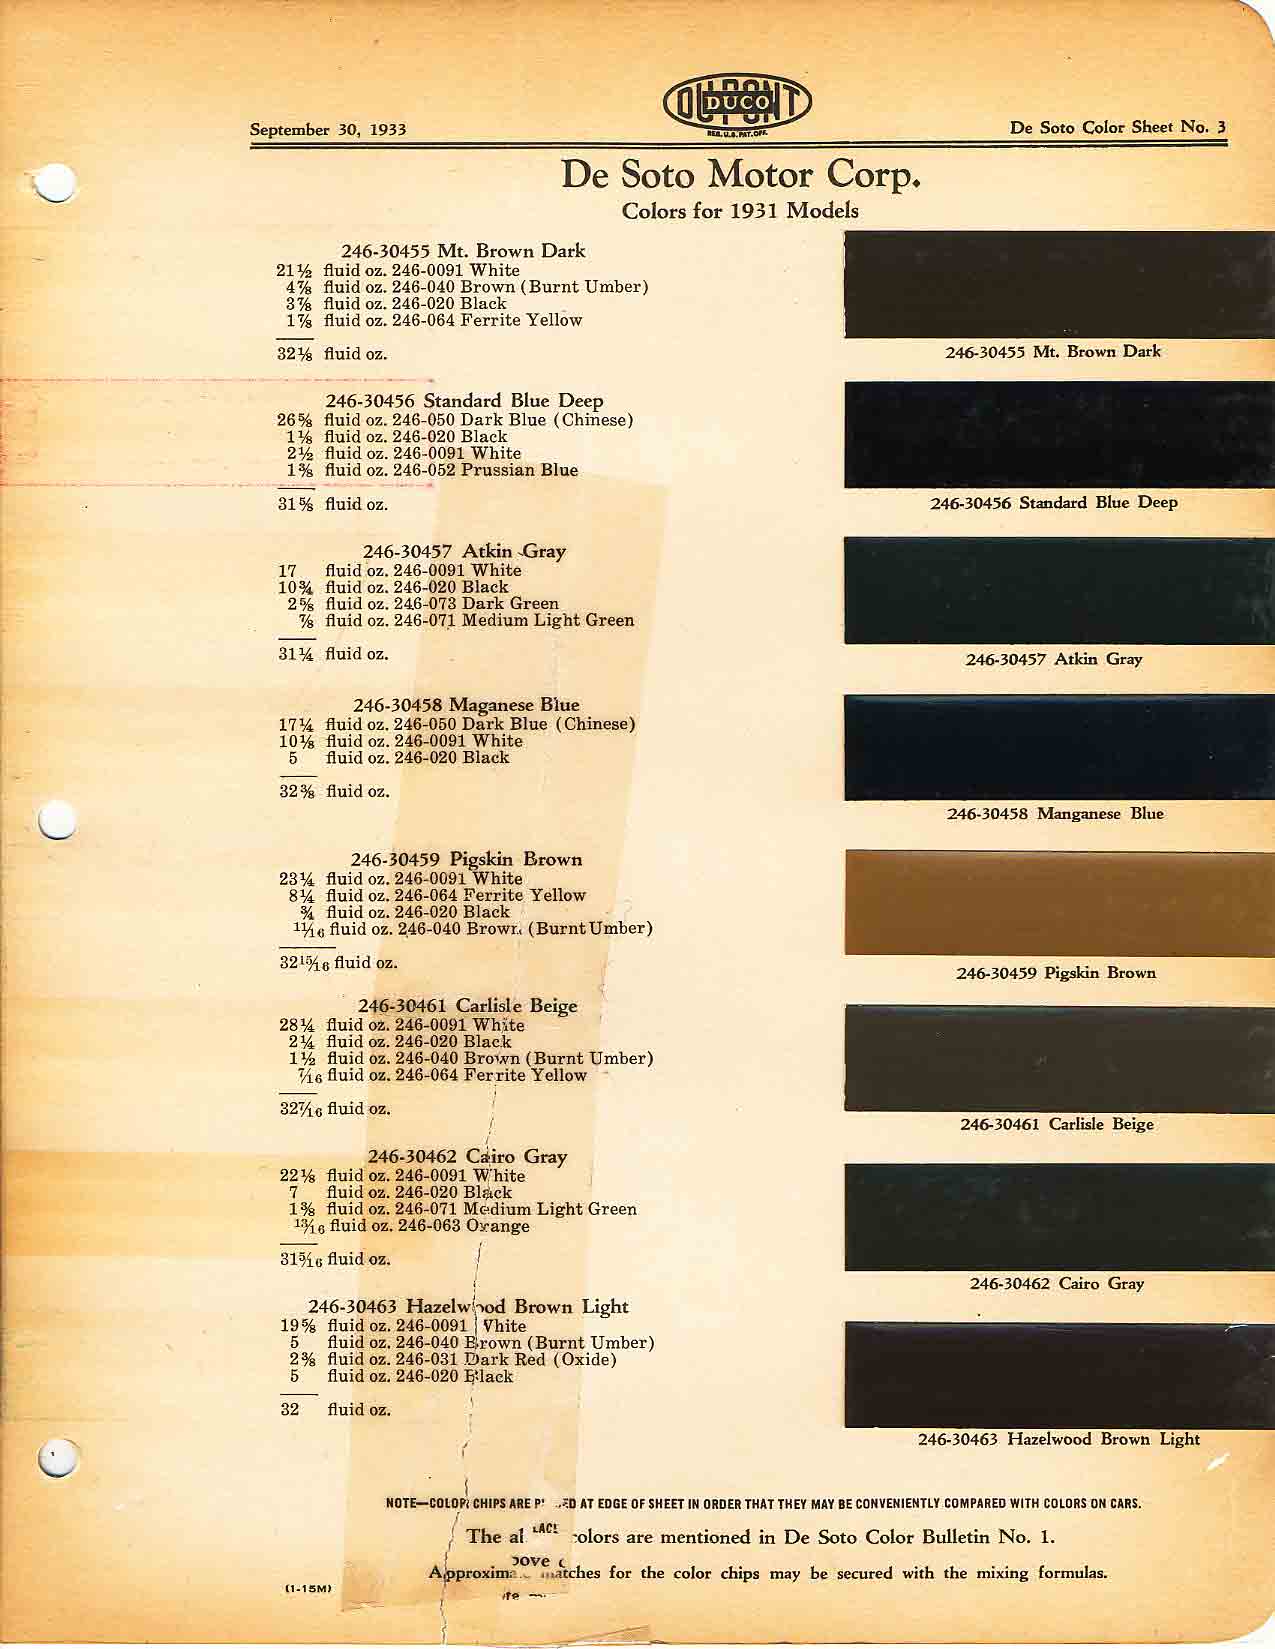 Exterior Paint codes and thier color examples for DeSoto Vehicles